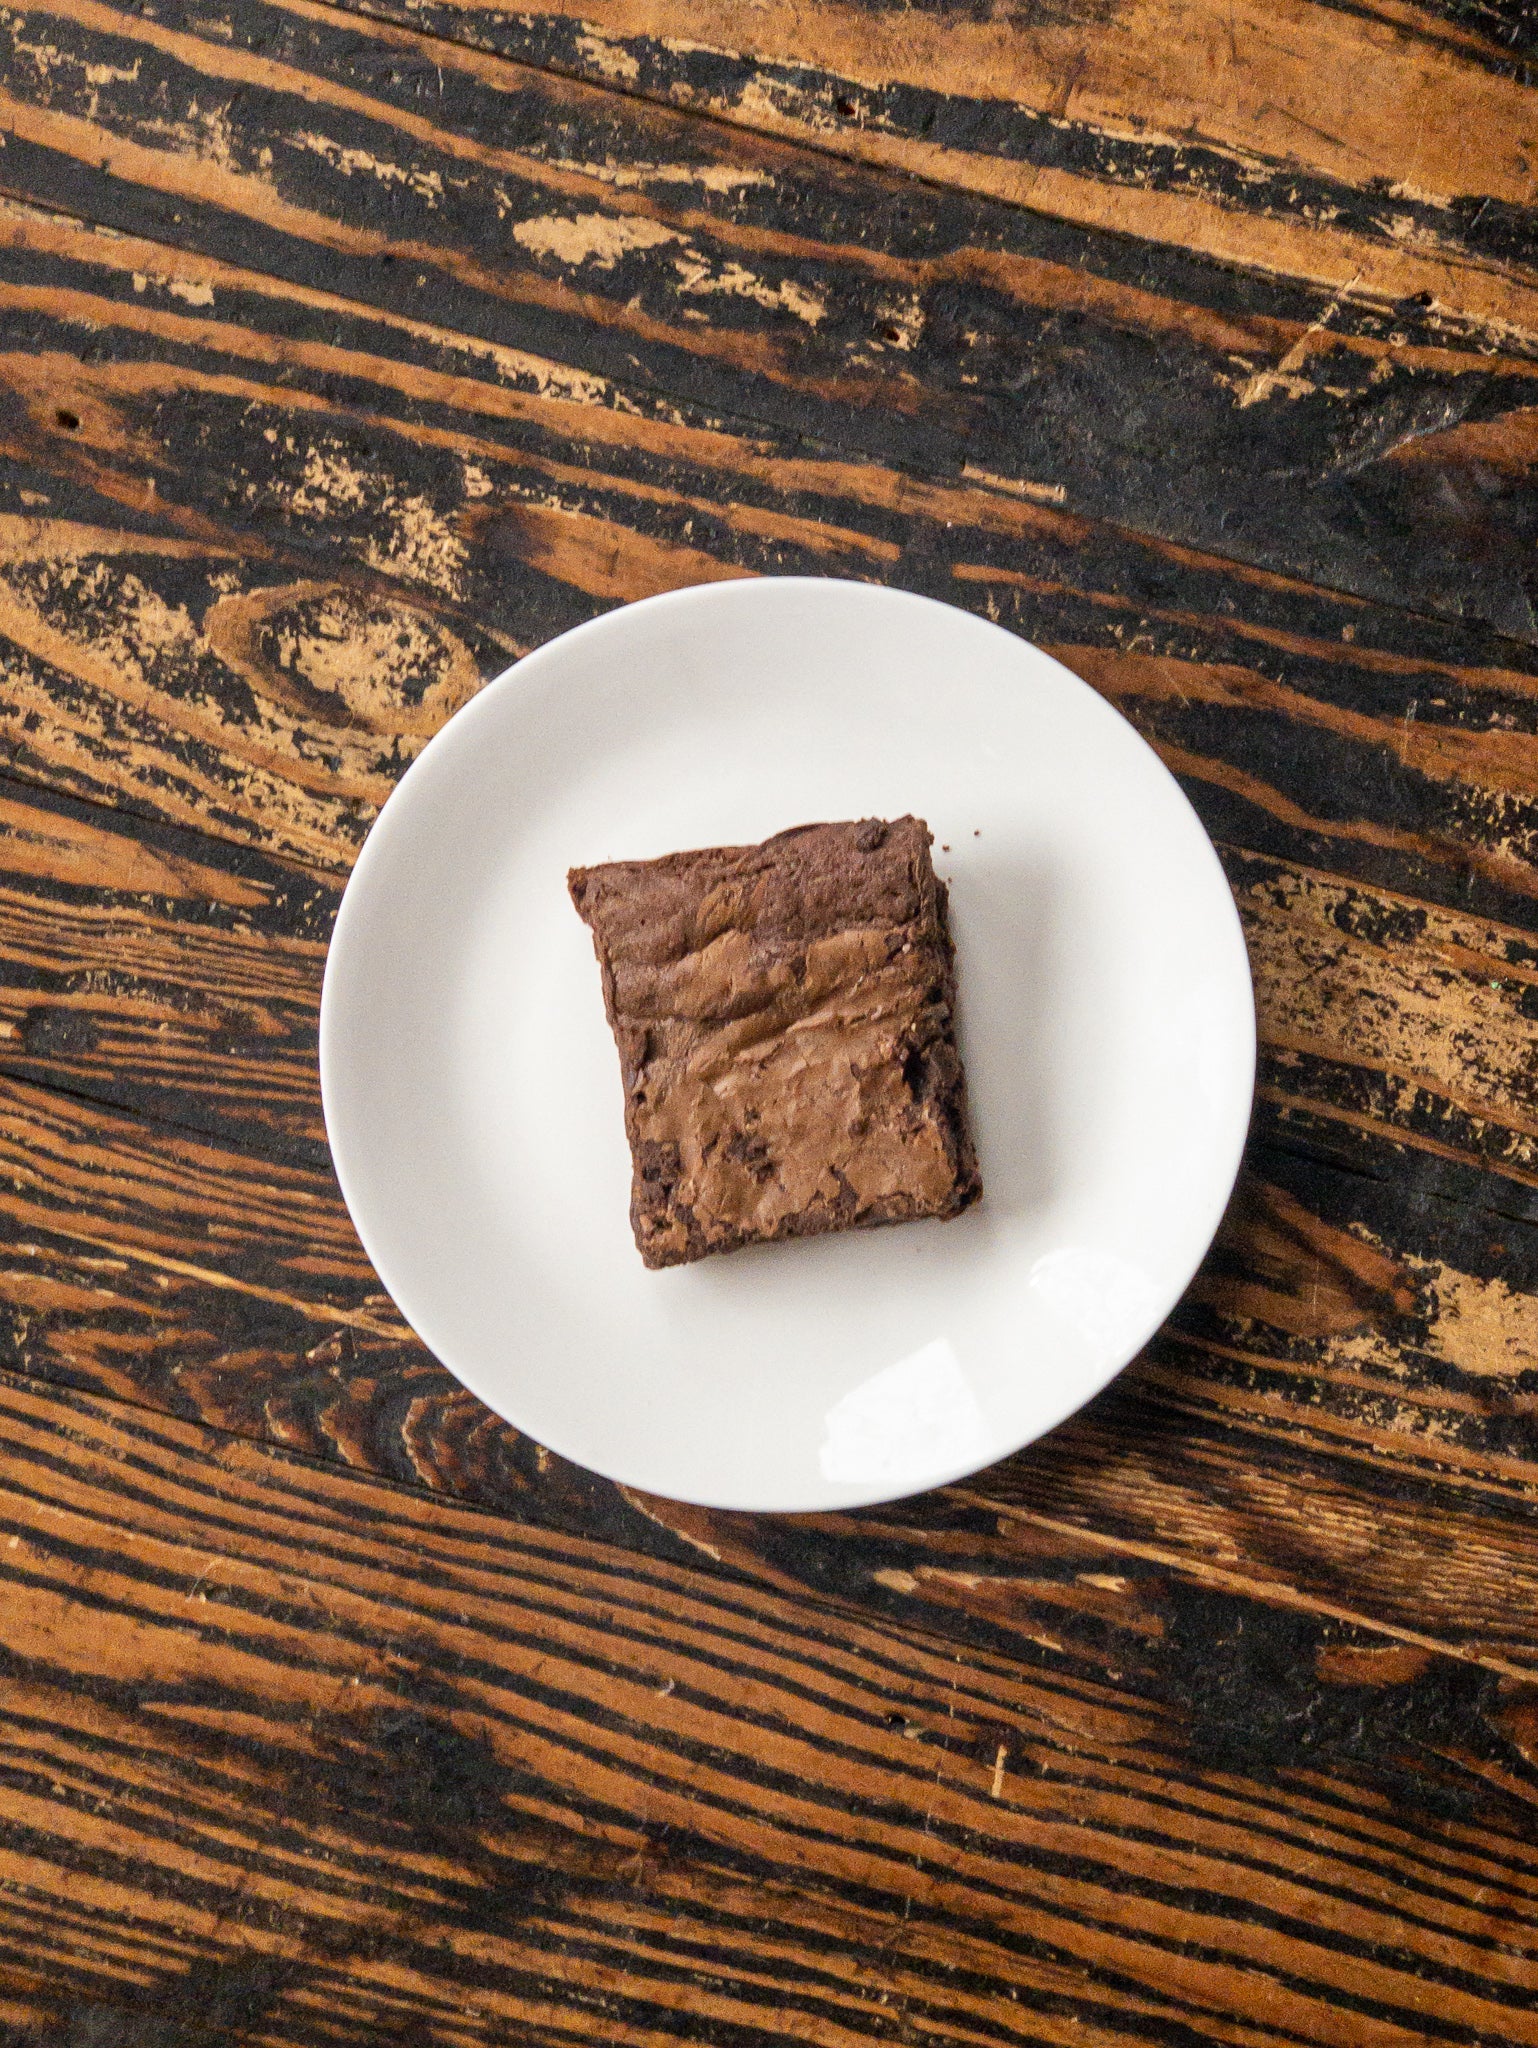 Gluten Free Brownies Baked Goods - The Meeting Place on Market